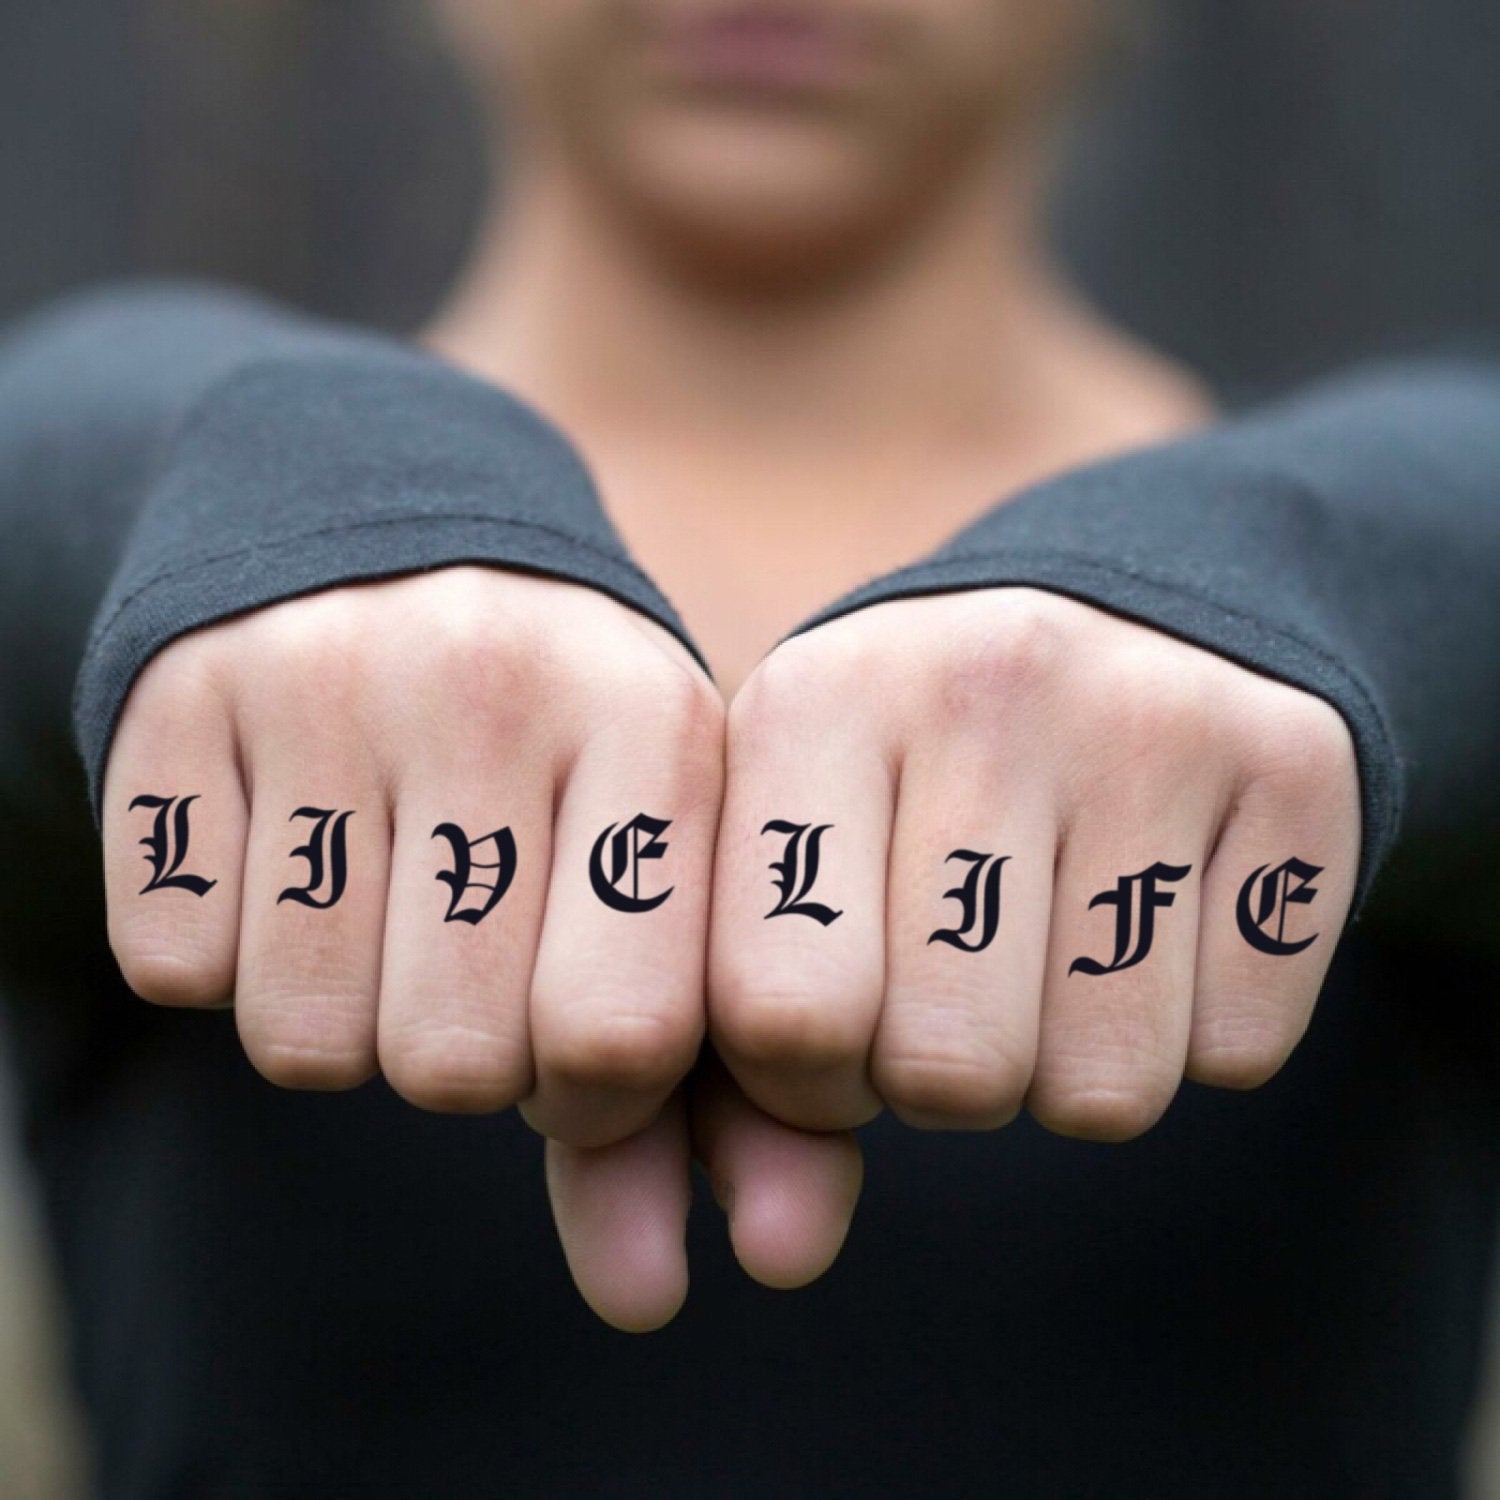 Share more than 76 knuckle tattoo font best  thtantai2